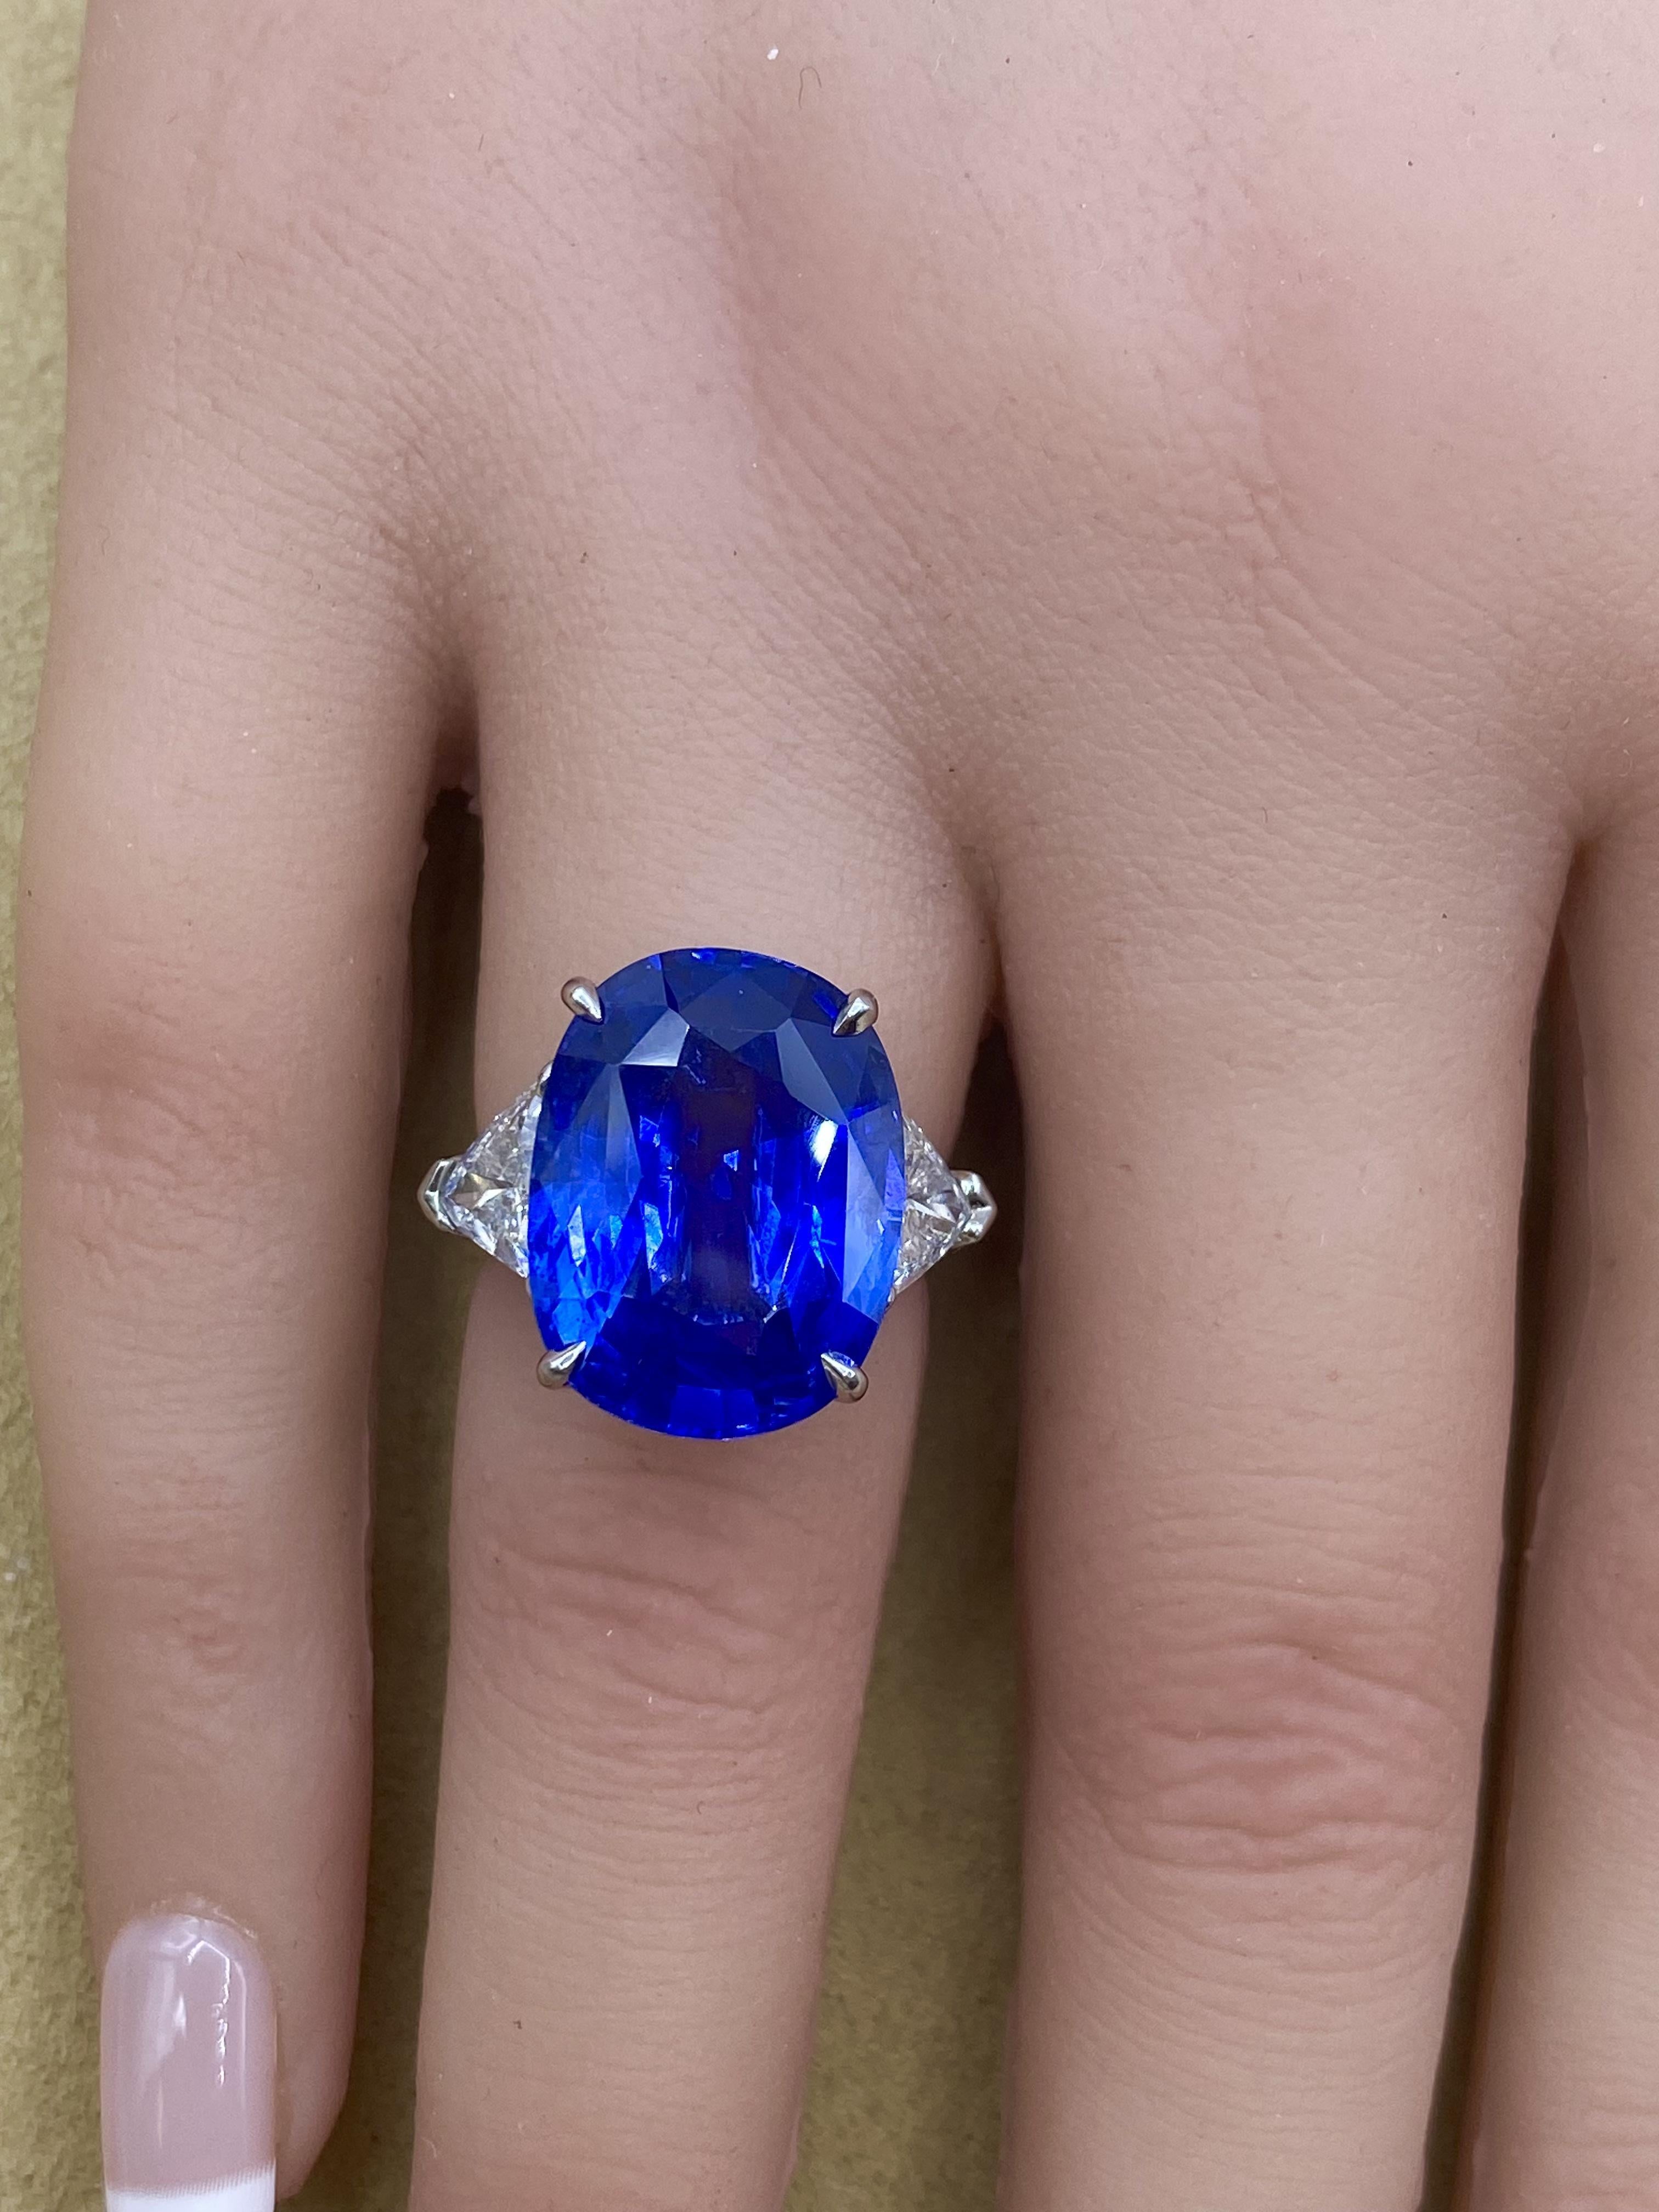 From Emilio Jewelry, a well known and respected wholesaler/dealer located on New York’s iconic Fifth Avenue, 
Please inquire for more images, certificates, and details. Zoom meetings available! 
An ultra are spectacular Natural sapphire is the focal